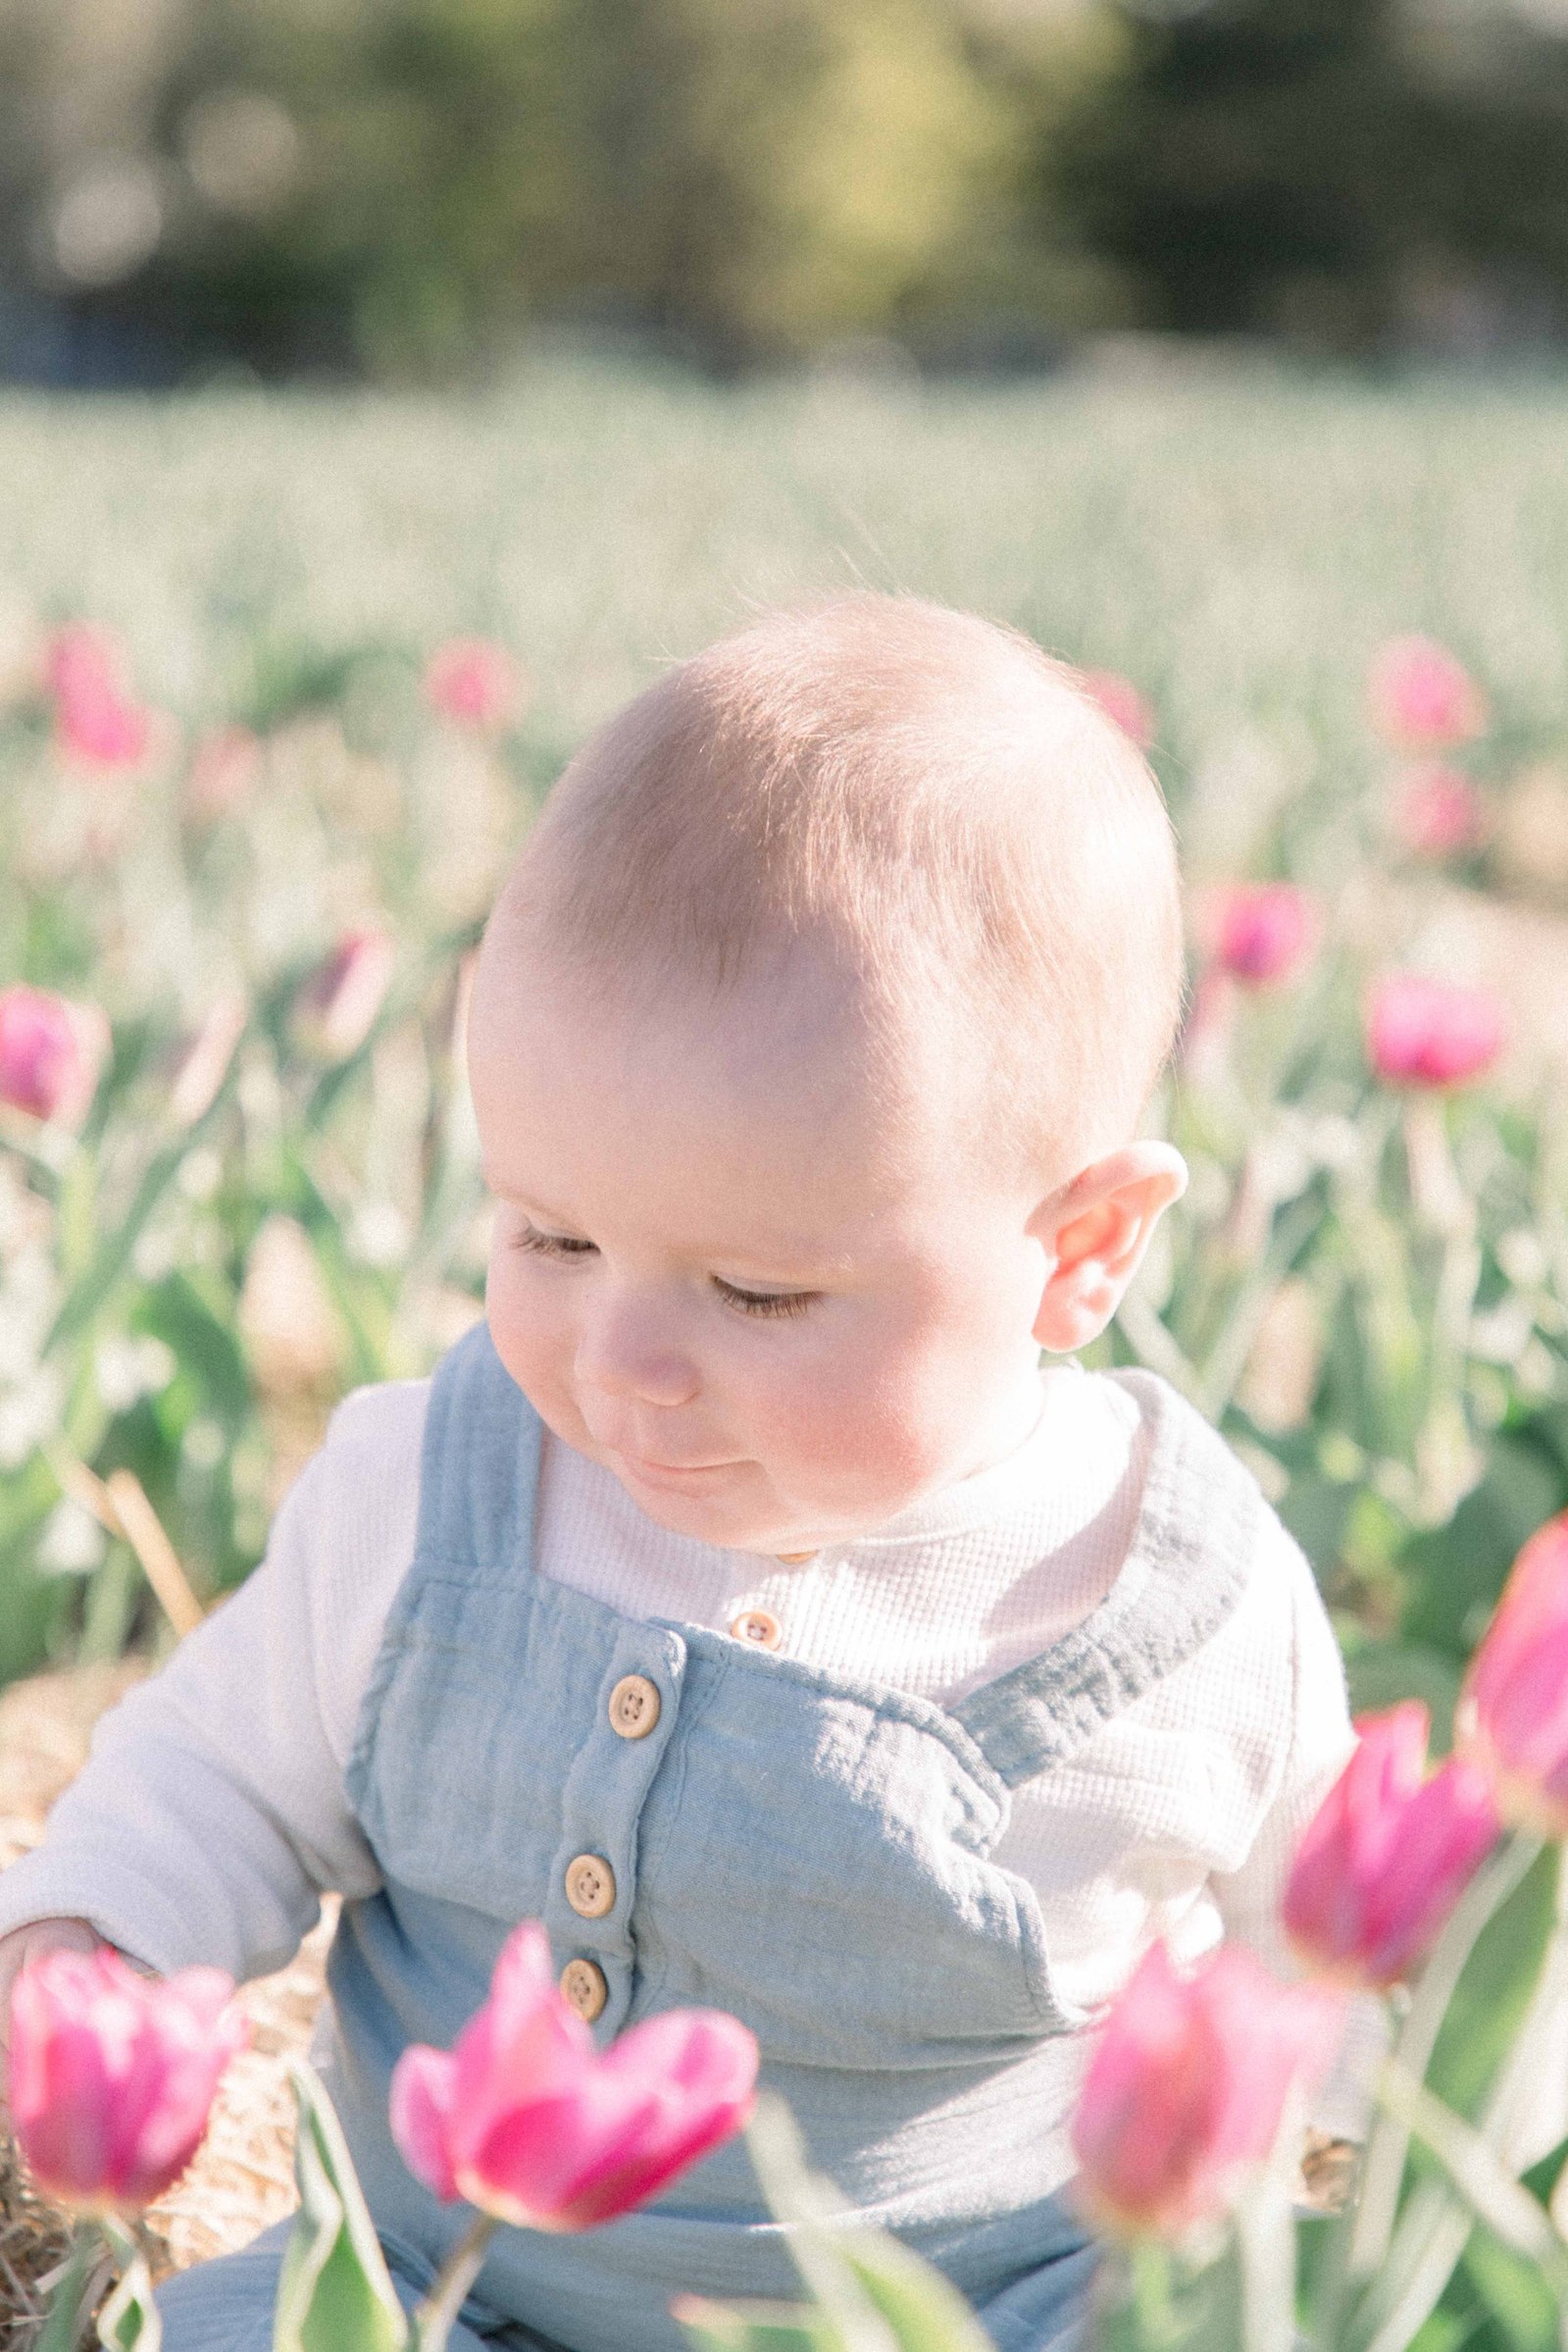 Portrait of baby boy fascinated by tulips while sitting in a tulip field. Vankleek Hill Portrait Photographer, L'Orignal, Champlain, Prescott-Russell, Family Photography, Candid Photography, Emily VanderBeek Photography.